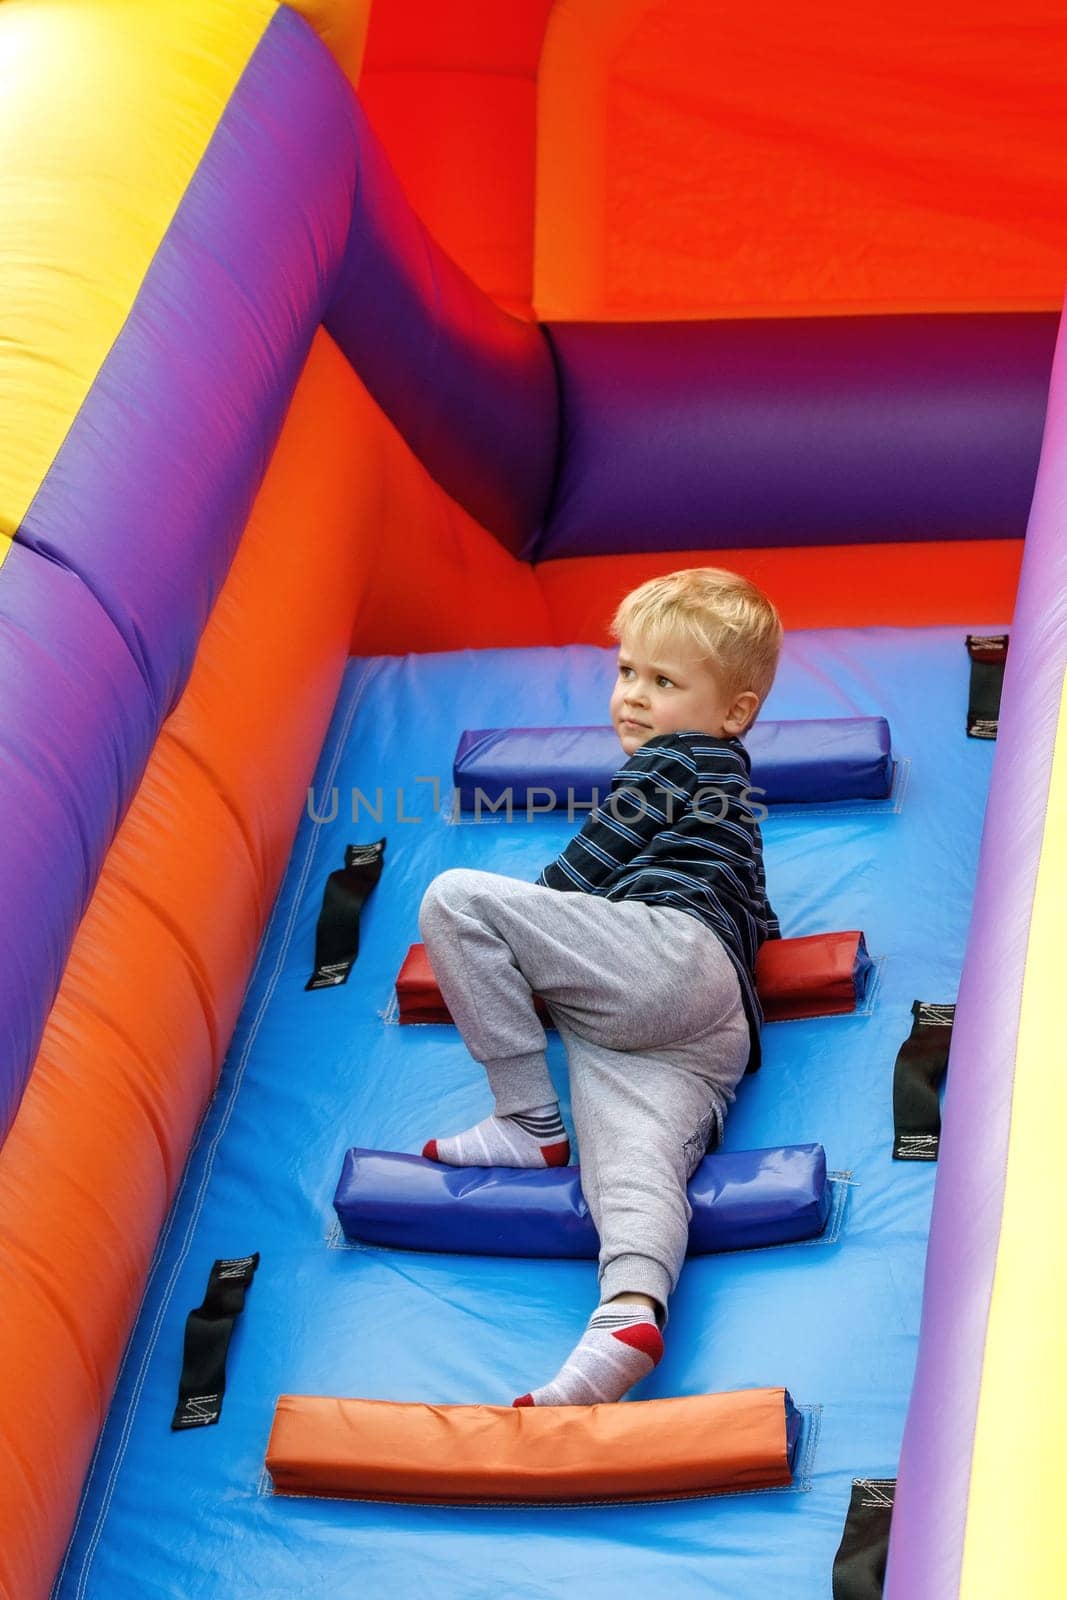 A brave little boy on top of an inflatable trampoline. by Lincikas